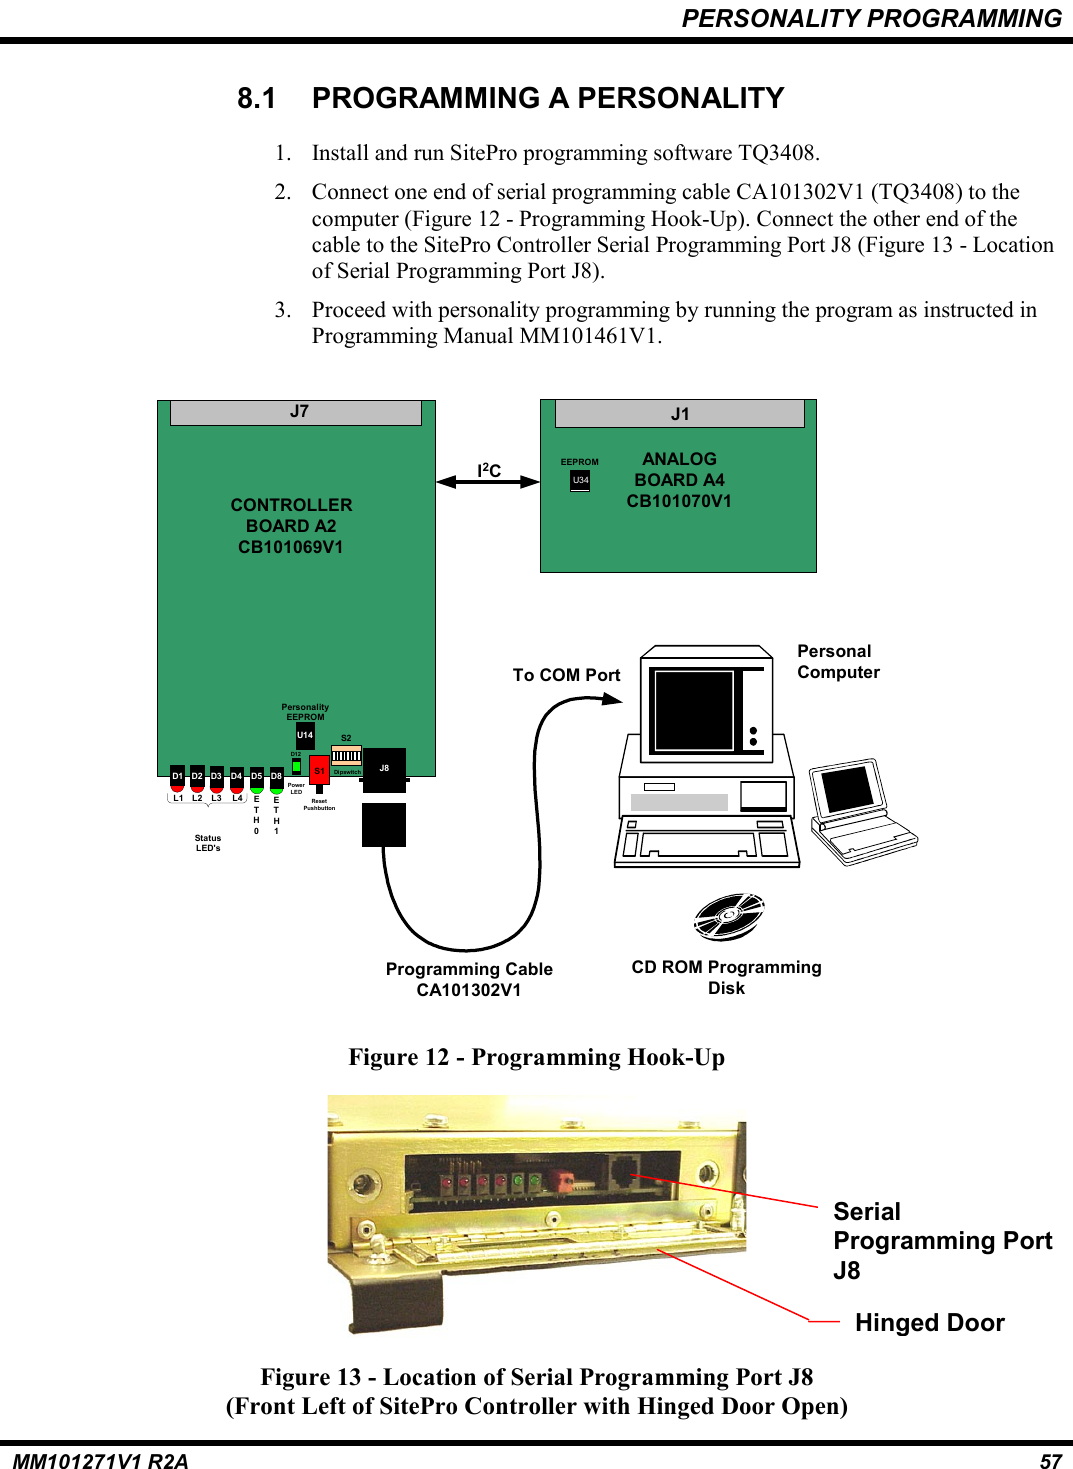 PERSONALITY PROGRAMMINGMM101271V1 R2A 578.1  PROGRAMMING A PERSONALITY1. Install and run SitePro programming software TQ3408.2. Connect one end of serial programming cable CA101302V1 (TQ3408) to thecomputer (Figure 12 - Programming Hook-Up). Connect the other end of thecable to the SitePro Controller Serial Programming Port J8 (Figure 13 - Locationof Serial Programming Port J8).3. Proceed with personality programming by running the program as instructed inProgramming Manual MM101461V1.CD ROM ProgrammingDiskJ7S1 J8D1 D2 D3 D4 D5 D8S2DipswitchResetPushbuttonStatusLED&apos;sL1 L2 L3 L4 ETH0ETH1D12PowerLEDU14PersonalityEEPROMCONTROLLERBOARD A2CB101069V1J1ANALOGBOARD A4CB101070V1I2CProgramming CableCA101302V1To COM PortPersonalComputerEEPROMU34Figure 12 - Programming Hook-UpFigure 13 - Location of Serial Programming Port J8(Front Left of SitePro Controller with Hinged Door Open)SerialProgramming PortJ8Hinged Door